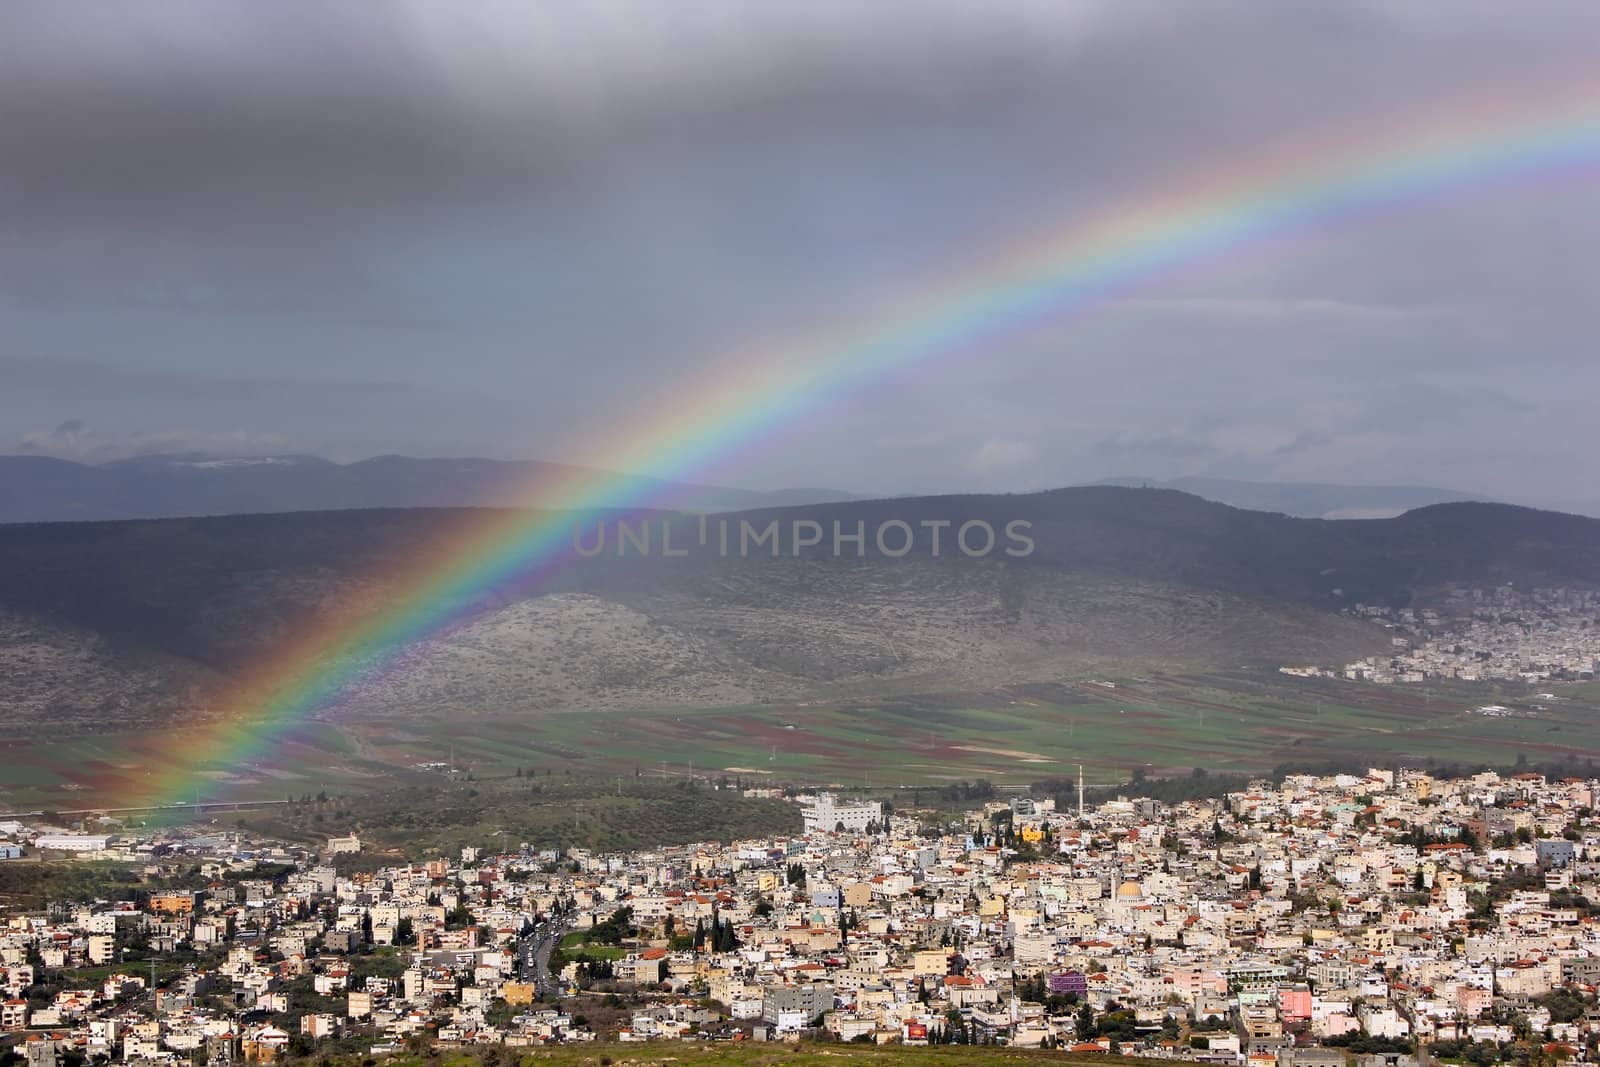 rainbow over the Arab village of Cana in the Galilee region of Israel.